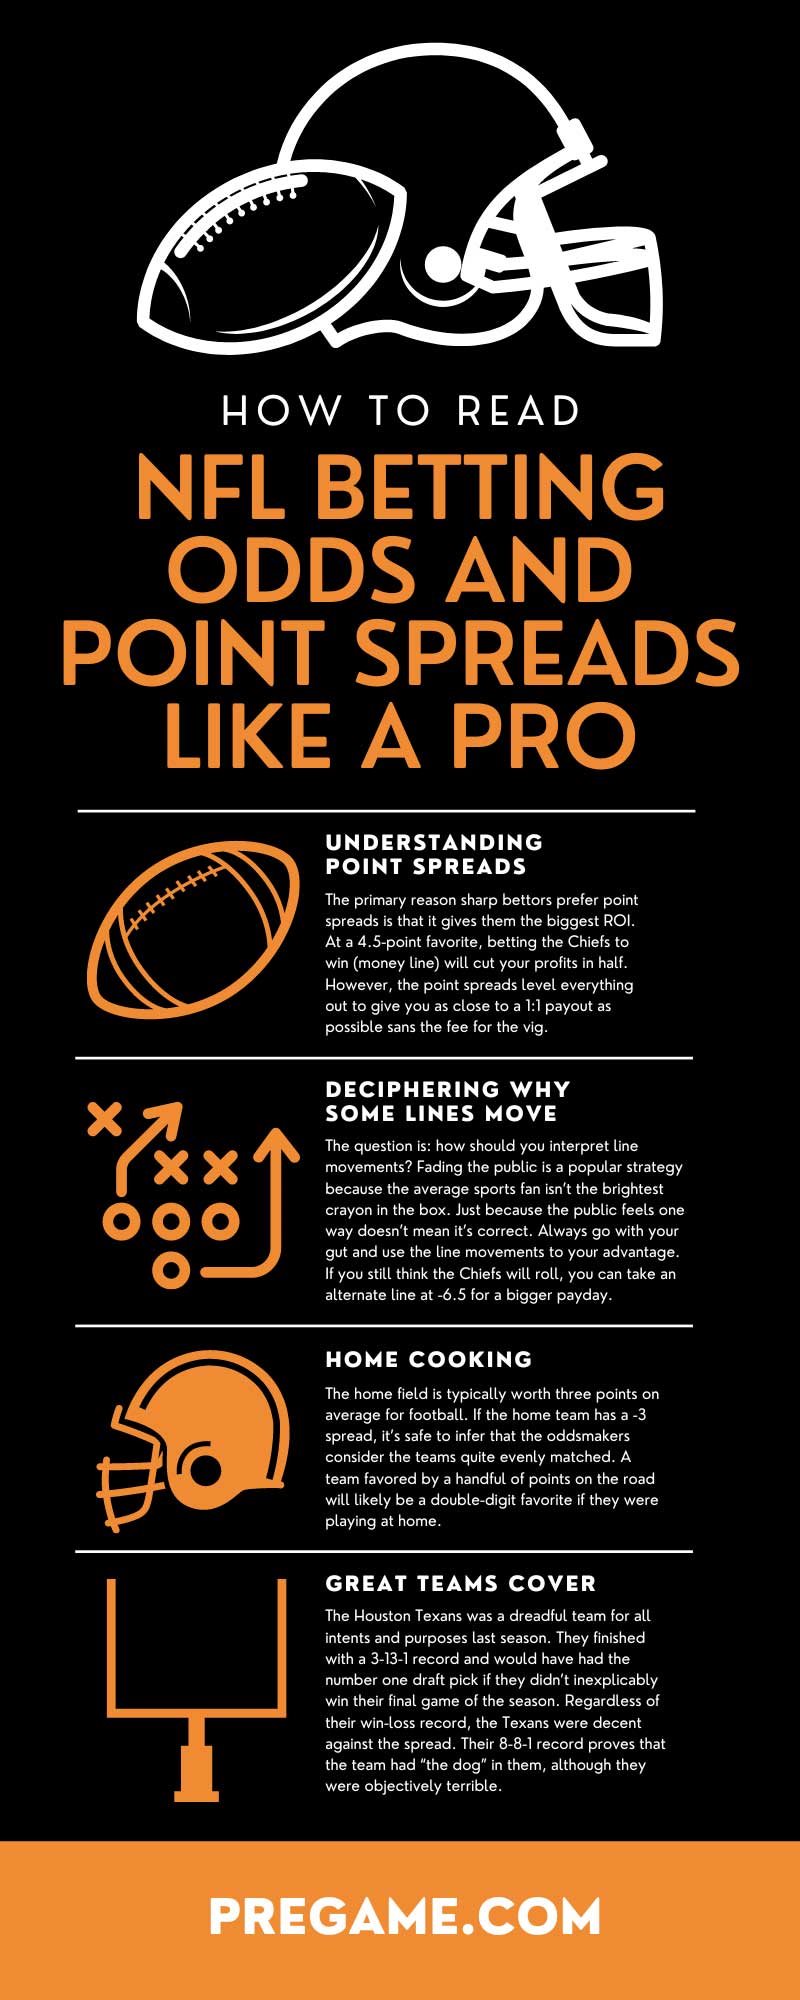 How To Read NFL Betting Odds and Point Spreads Like a Pro